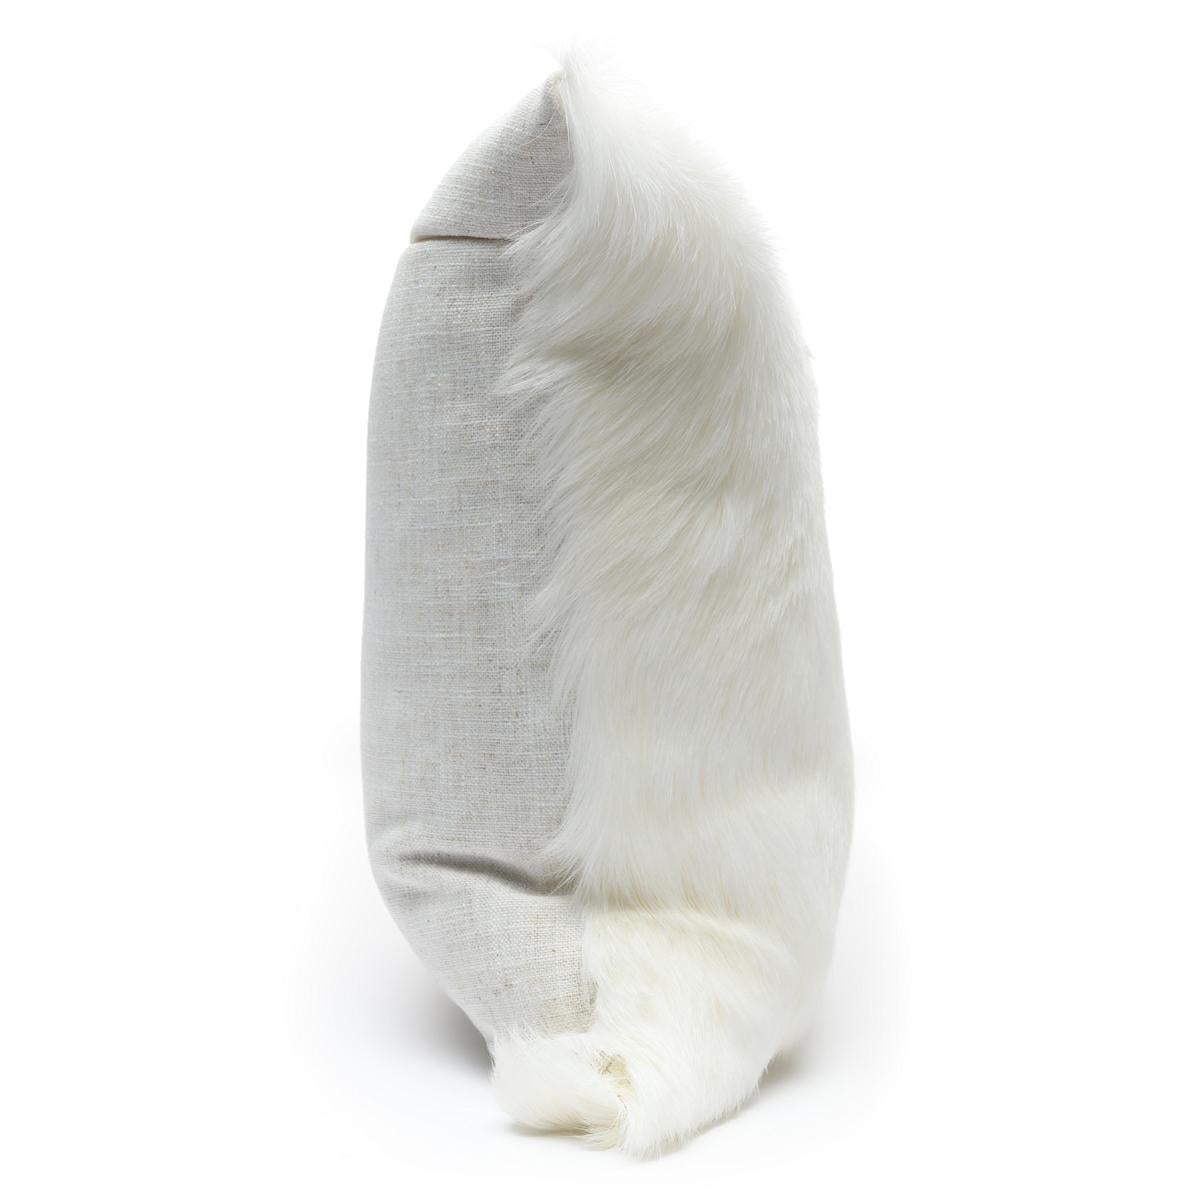 Add exotic elements to your decor with this natural white goat hair pillow. Australian designer, Emily Barbara personally selects each goat skin so that she may capture the natural beauty of each hide used in each individual cushion. Featuring